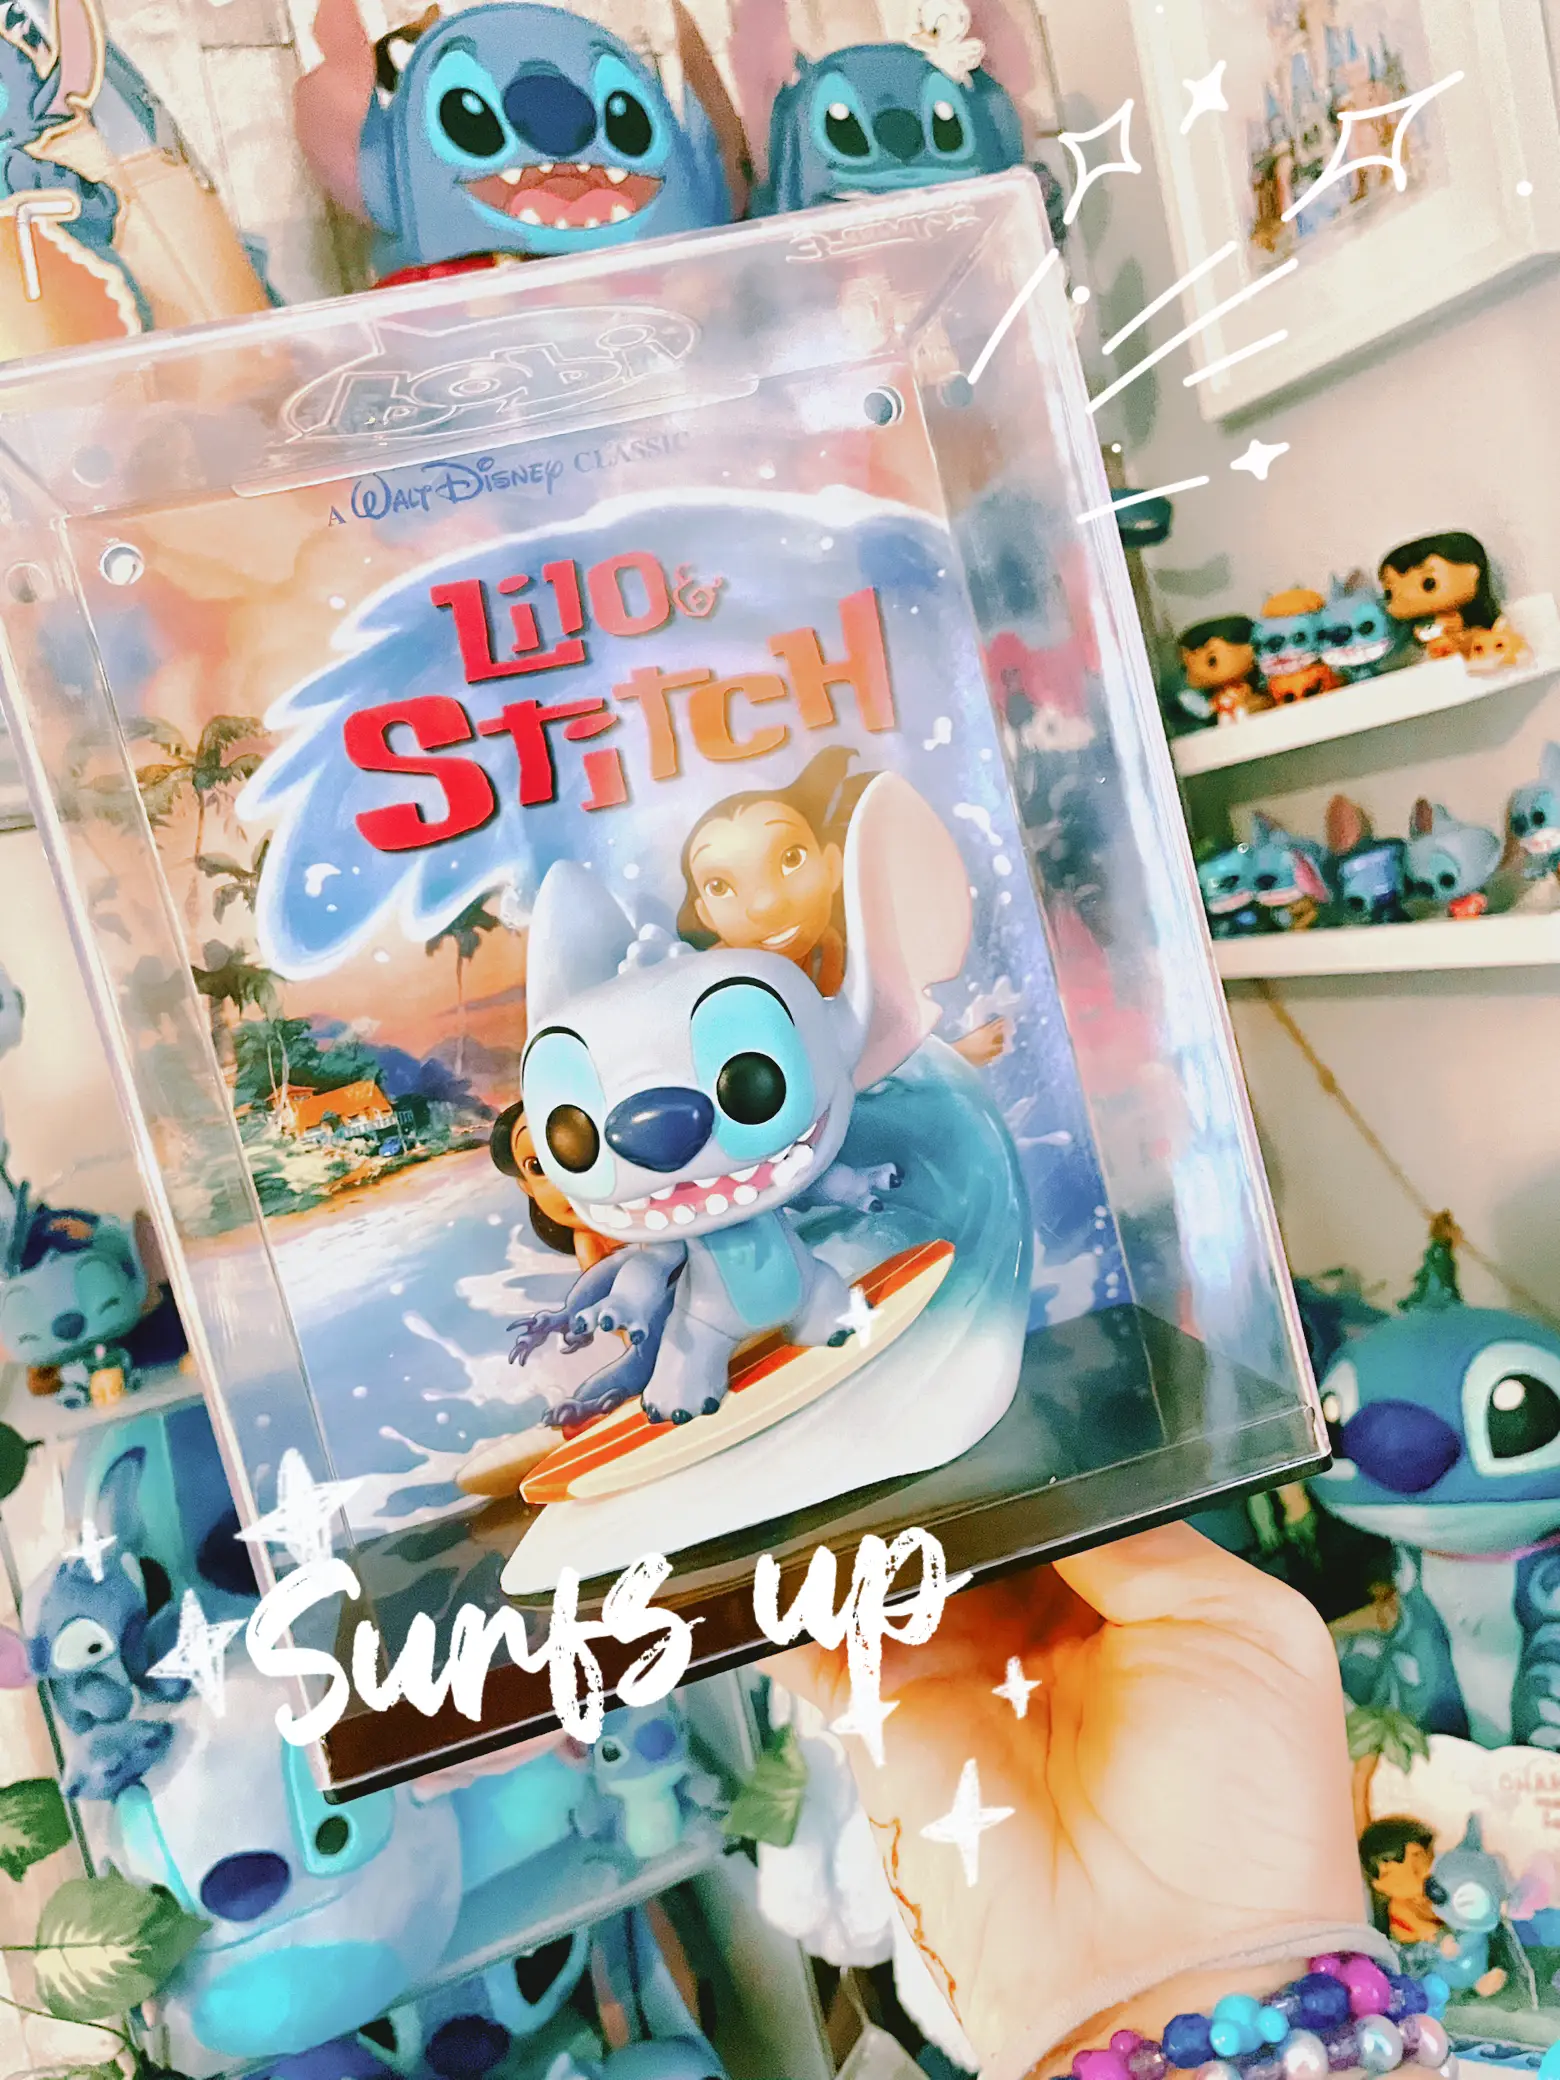 ✨Always surfing the Internet for new stitch merch✨, Gallery posted by  Disneymagic626